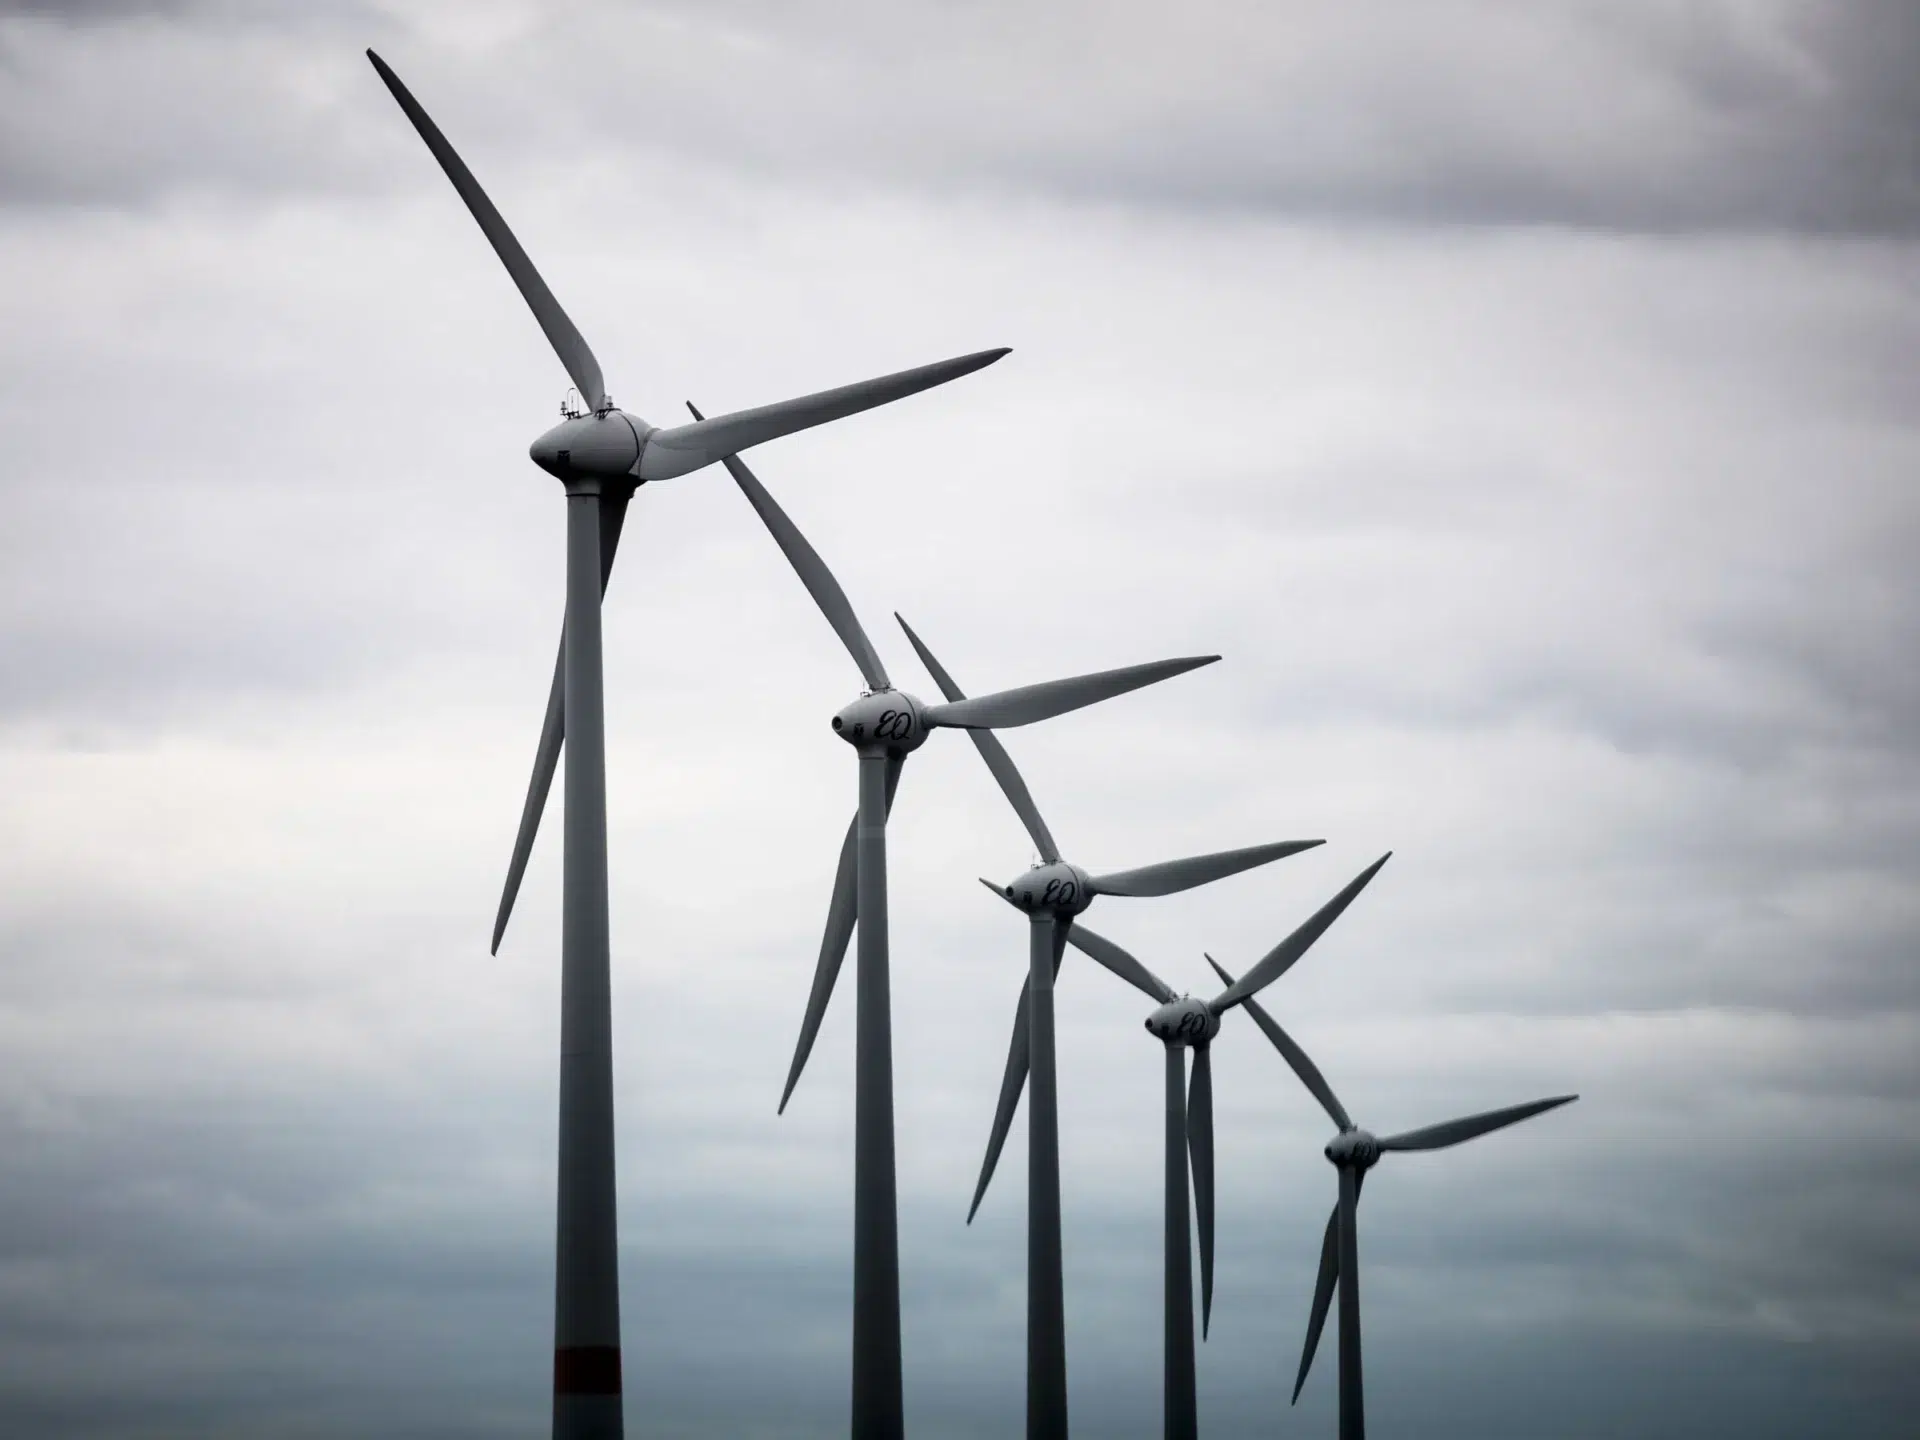 Breaking Down the Numbers: Calculating the Energy Output of Wind Turbines